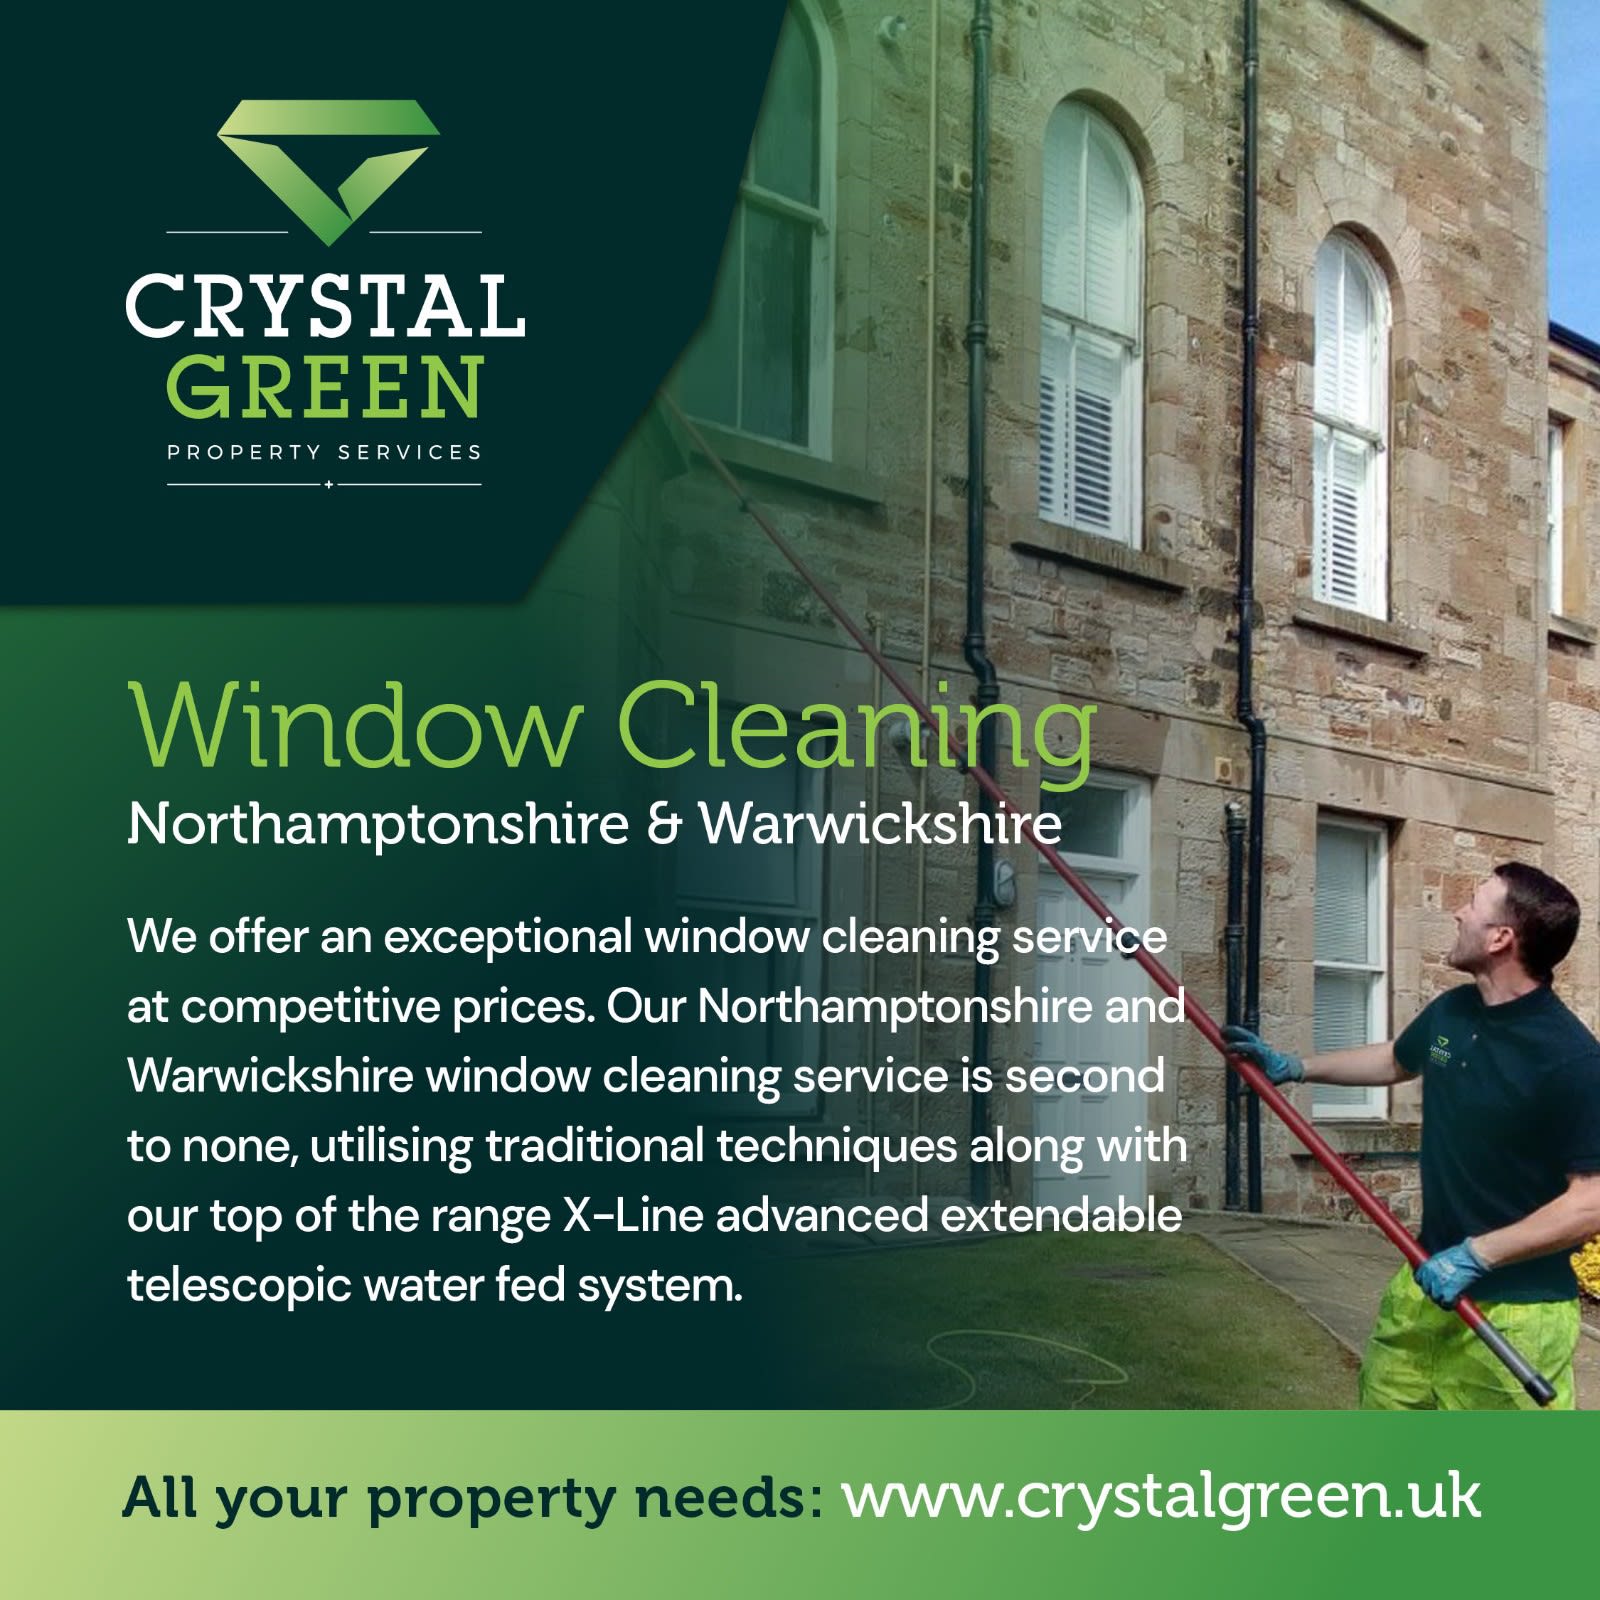 Images Crystal Green Property Services Ltd